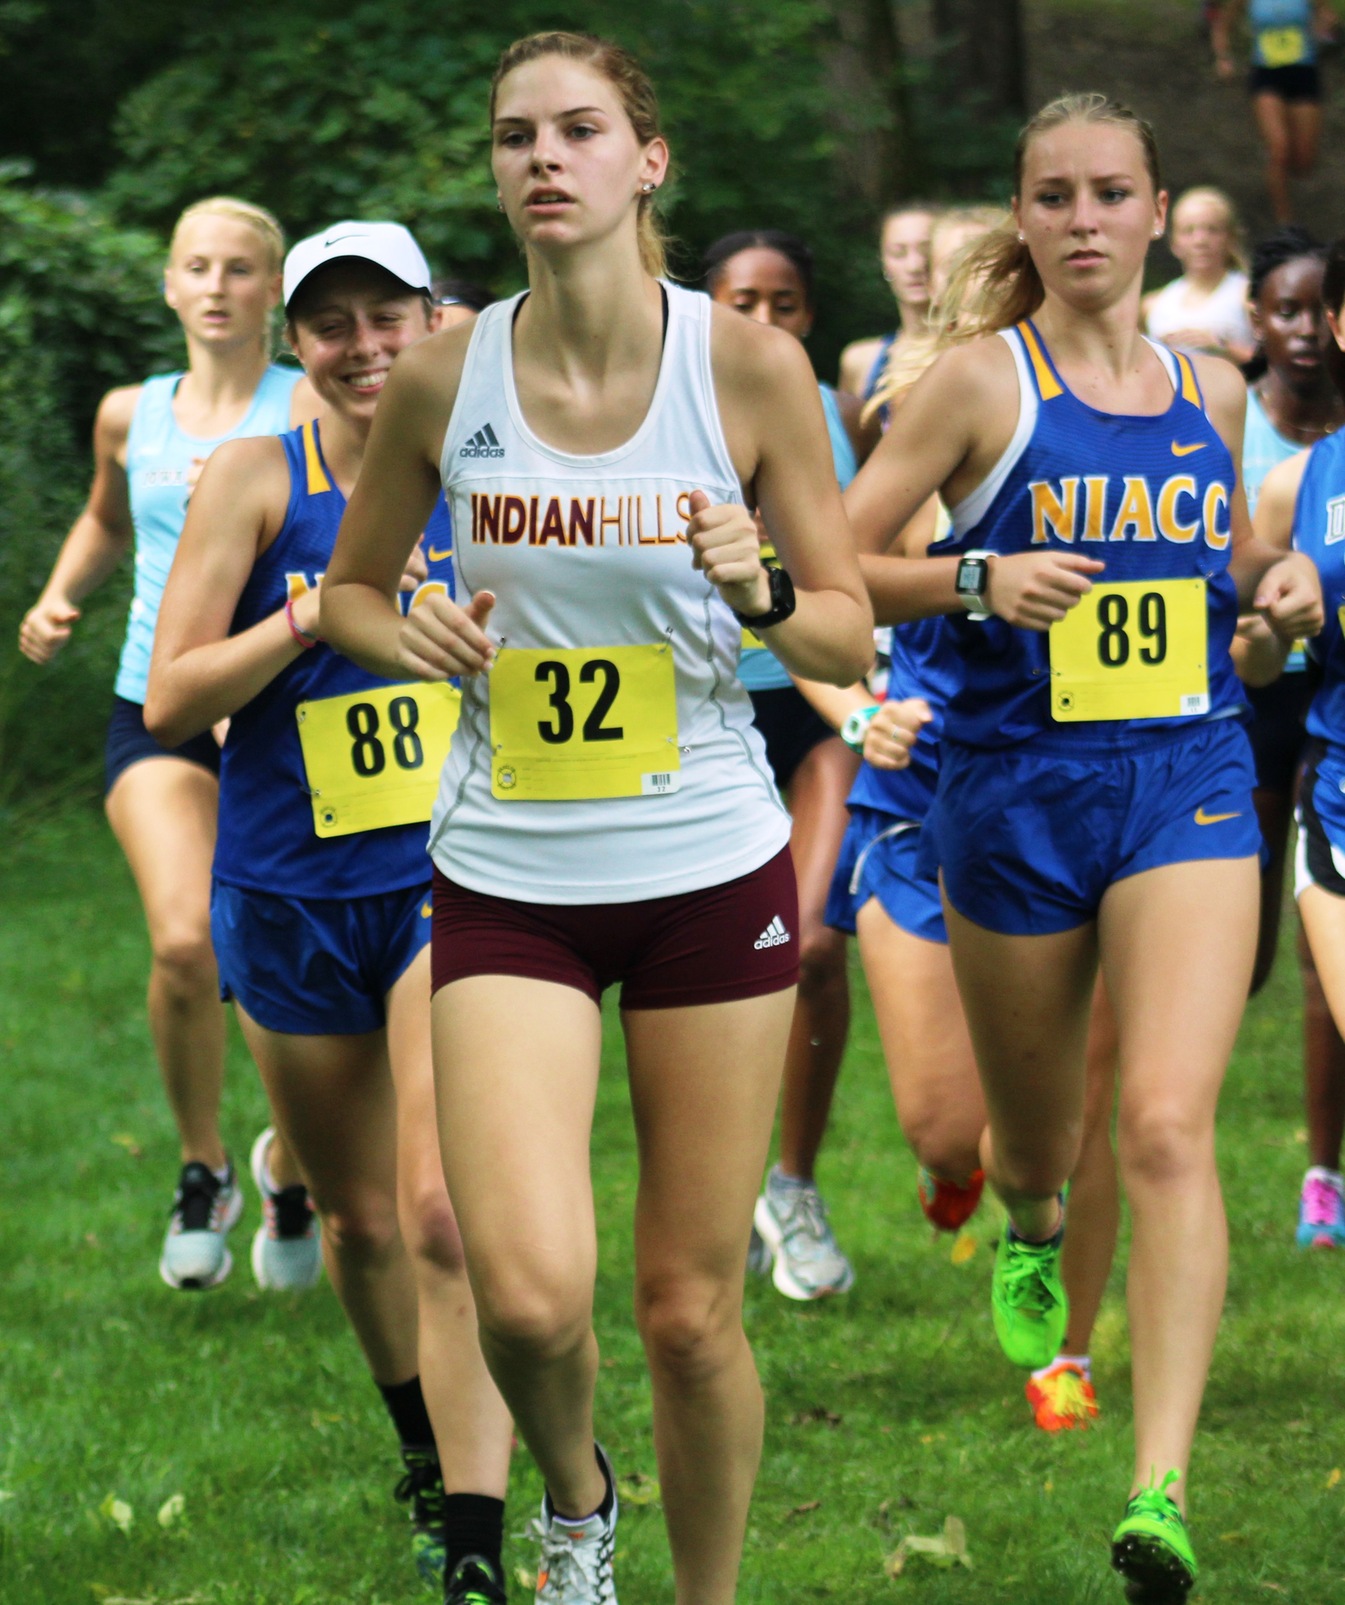 Julia Dunlavey (88) and Cecilia Hemsworth (89) run at the regional time trial on Aug. 25 in Davenport.